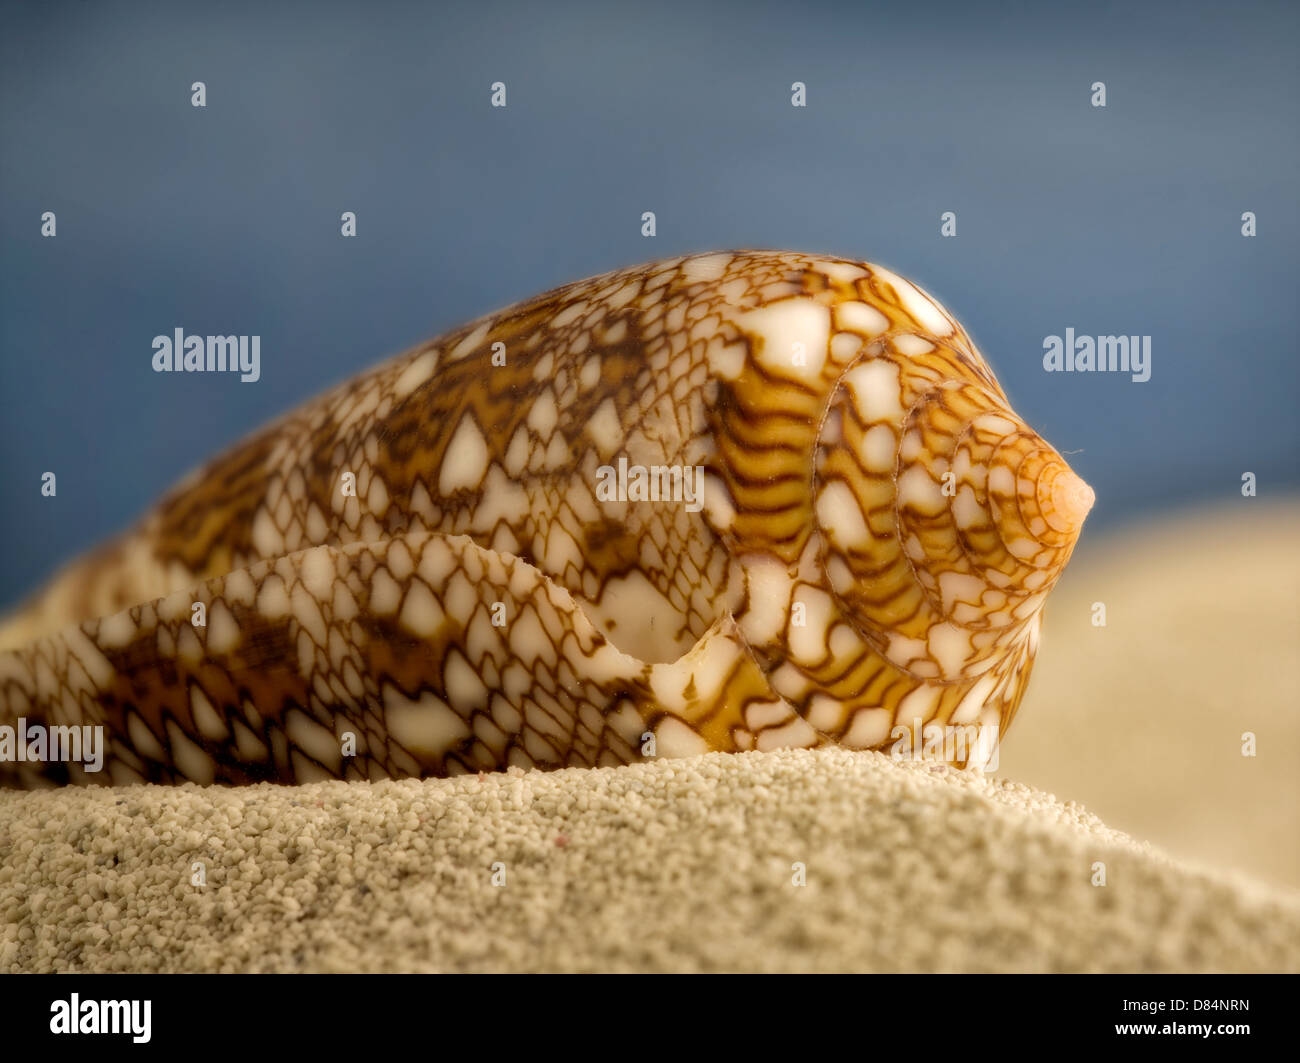 Close up of Textile Cone seashell on beach sand. Stock Photo